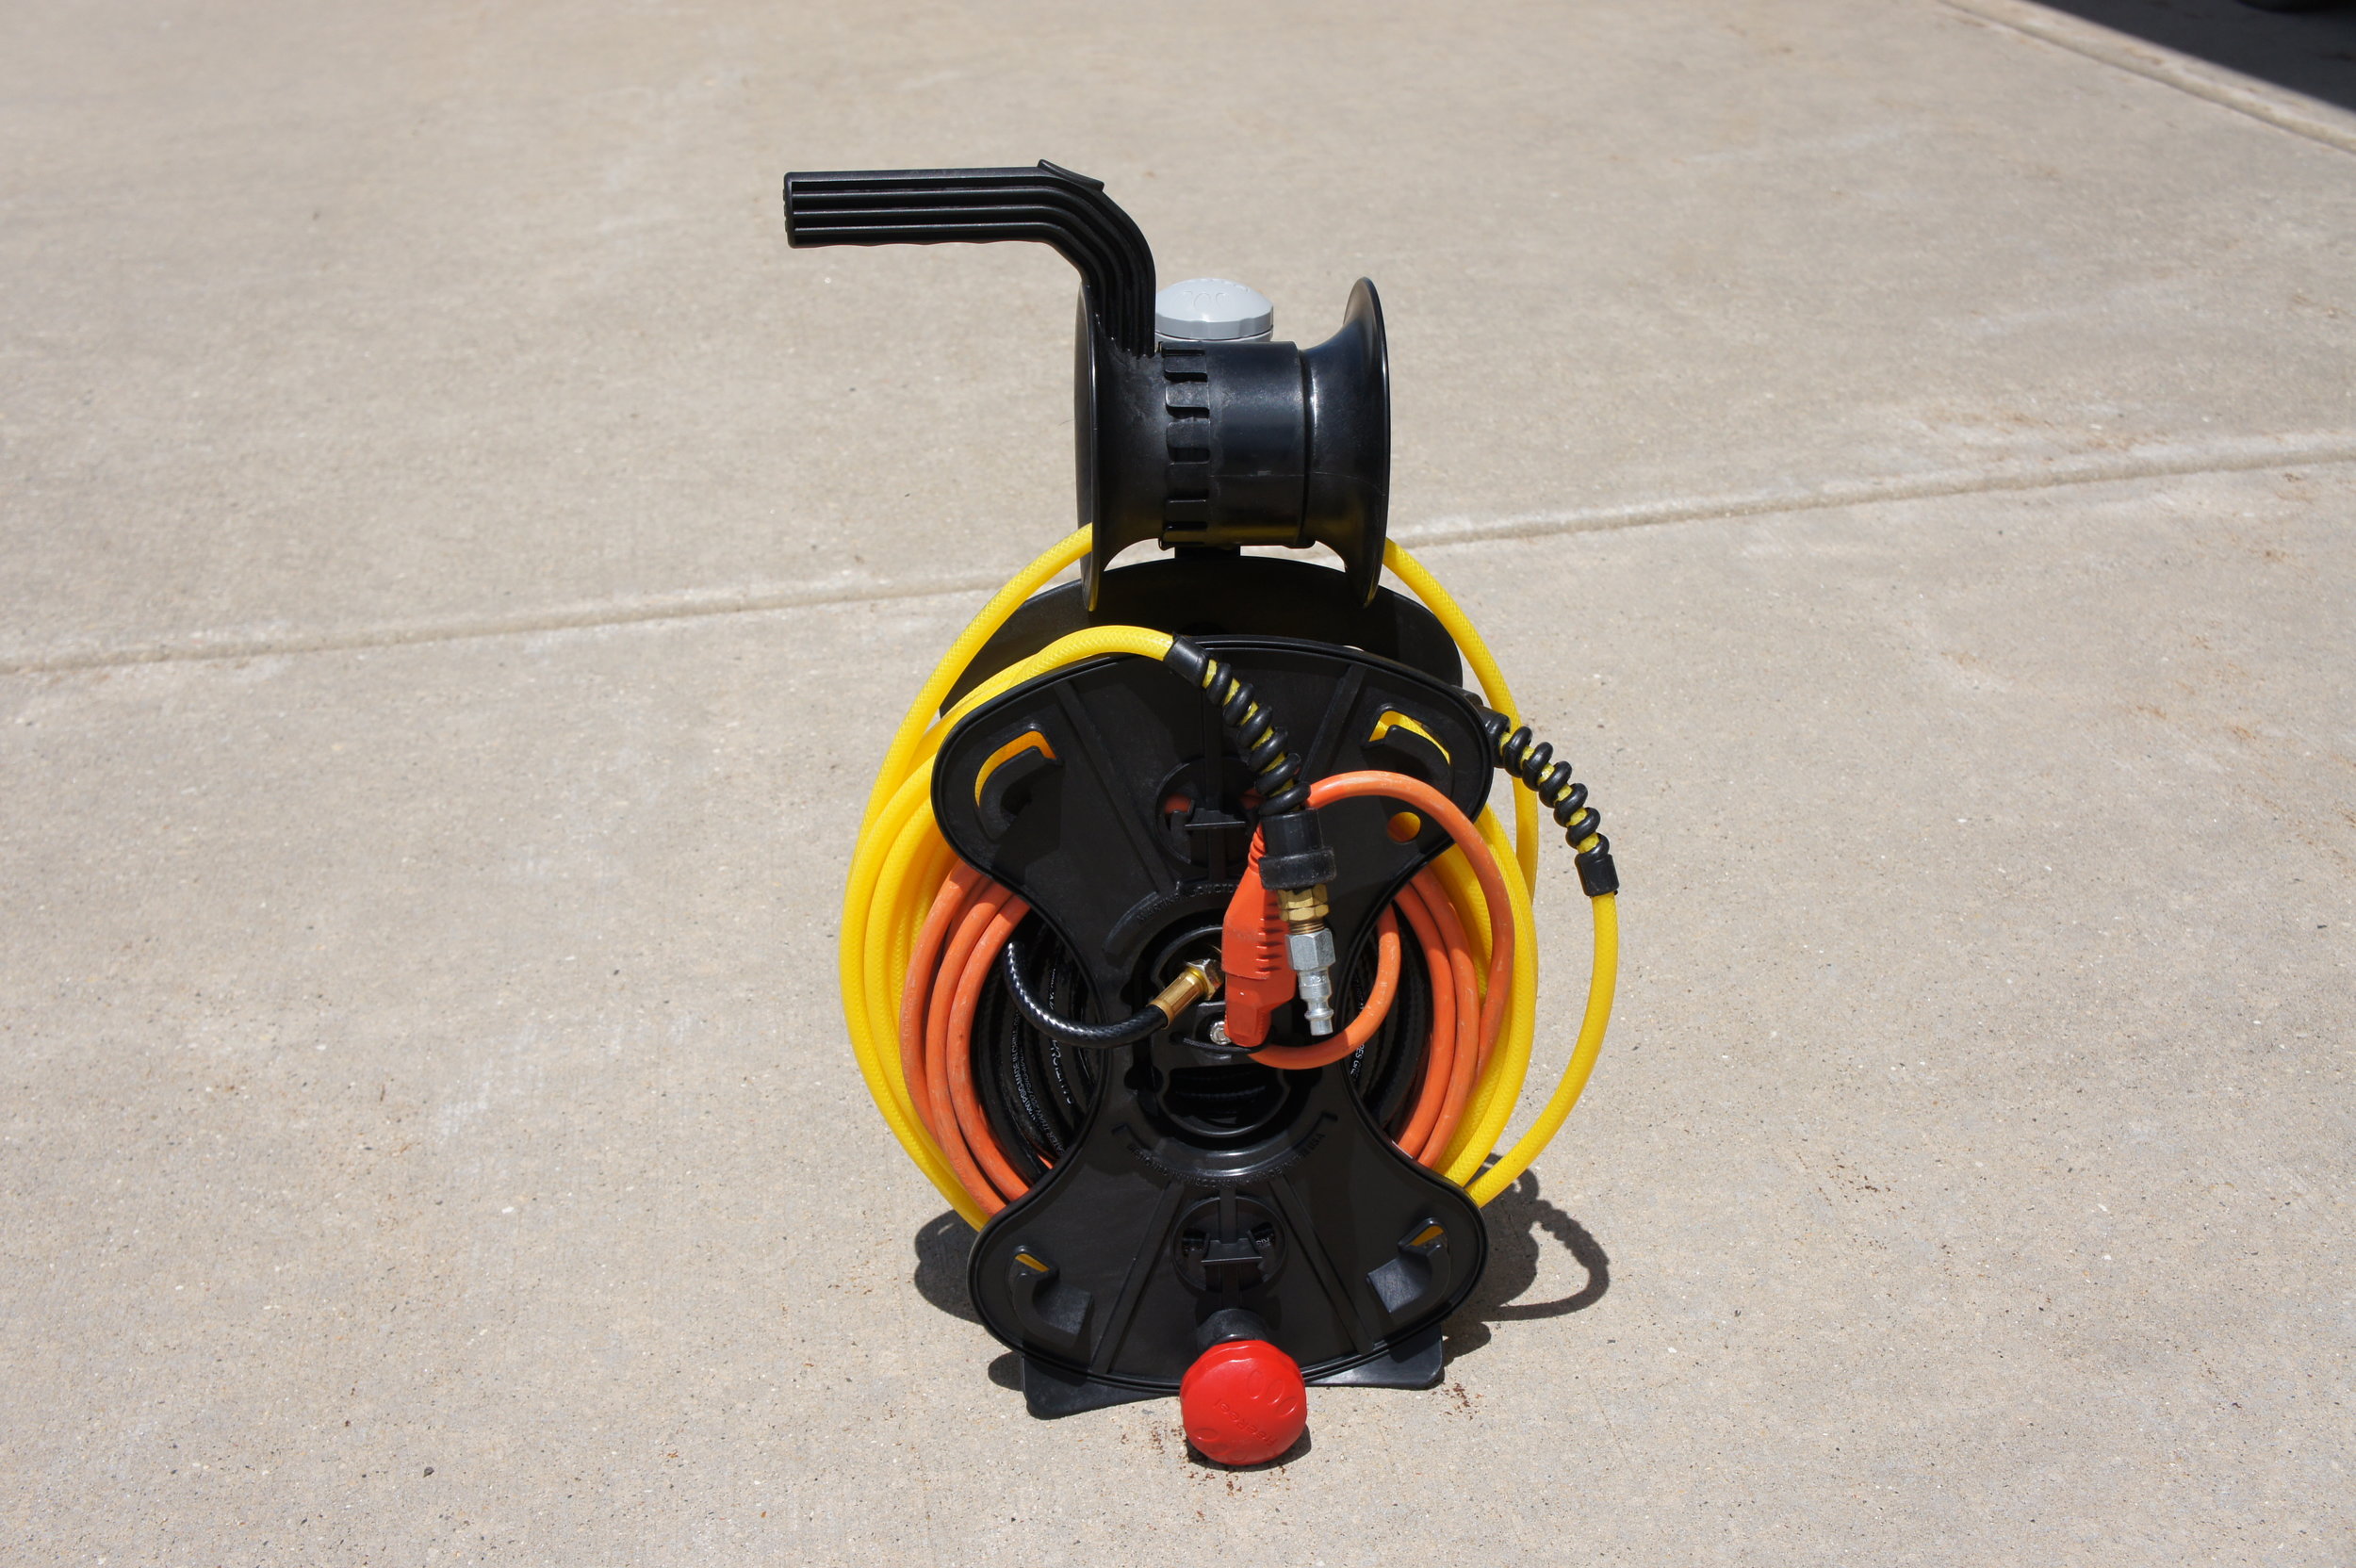 The FreeReel with Power Cord and Air Hose